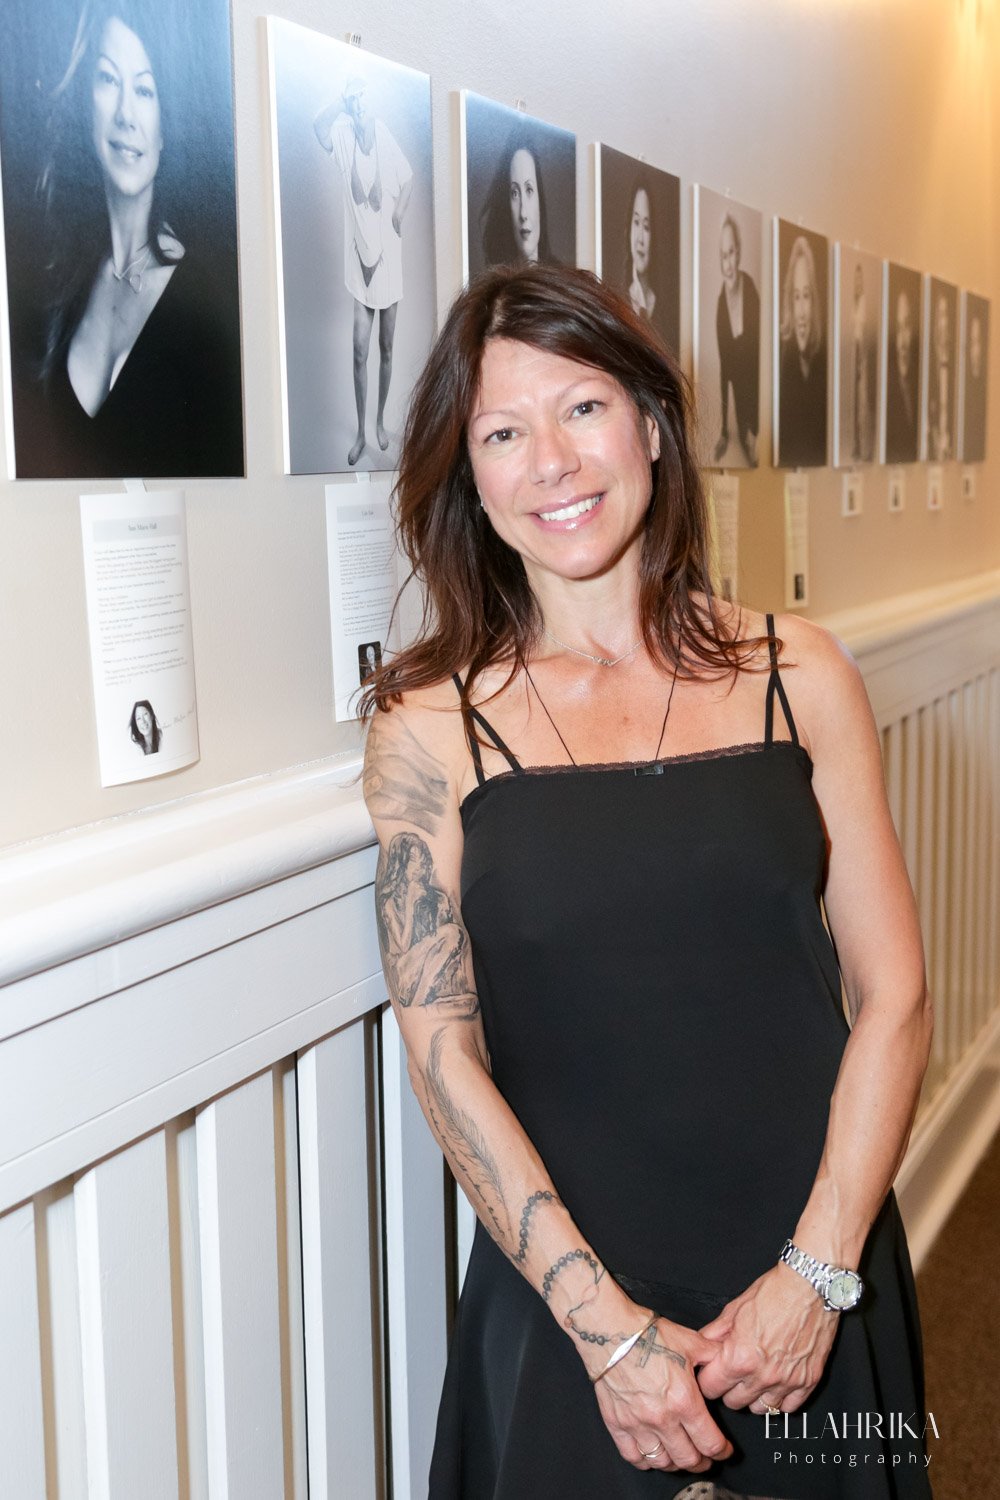 Toronto Glamour Photos exhibit. The 40 over 40 project at Hugh Foster Hall